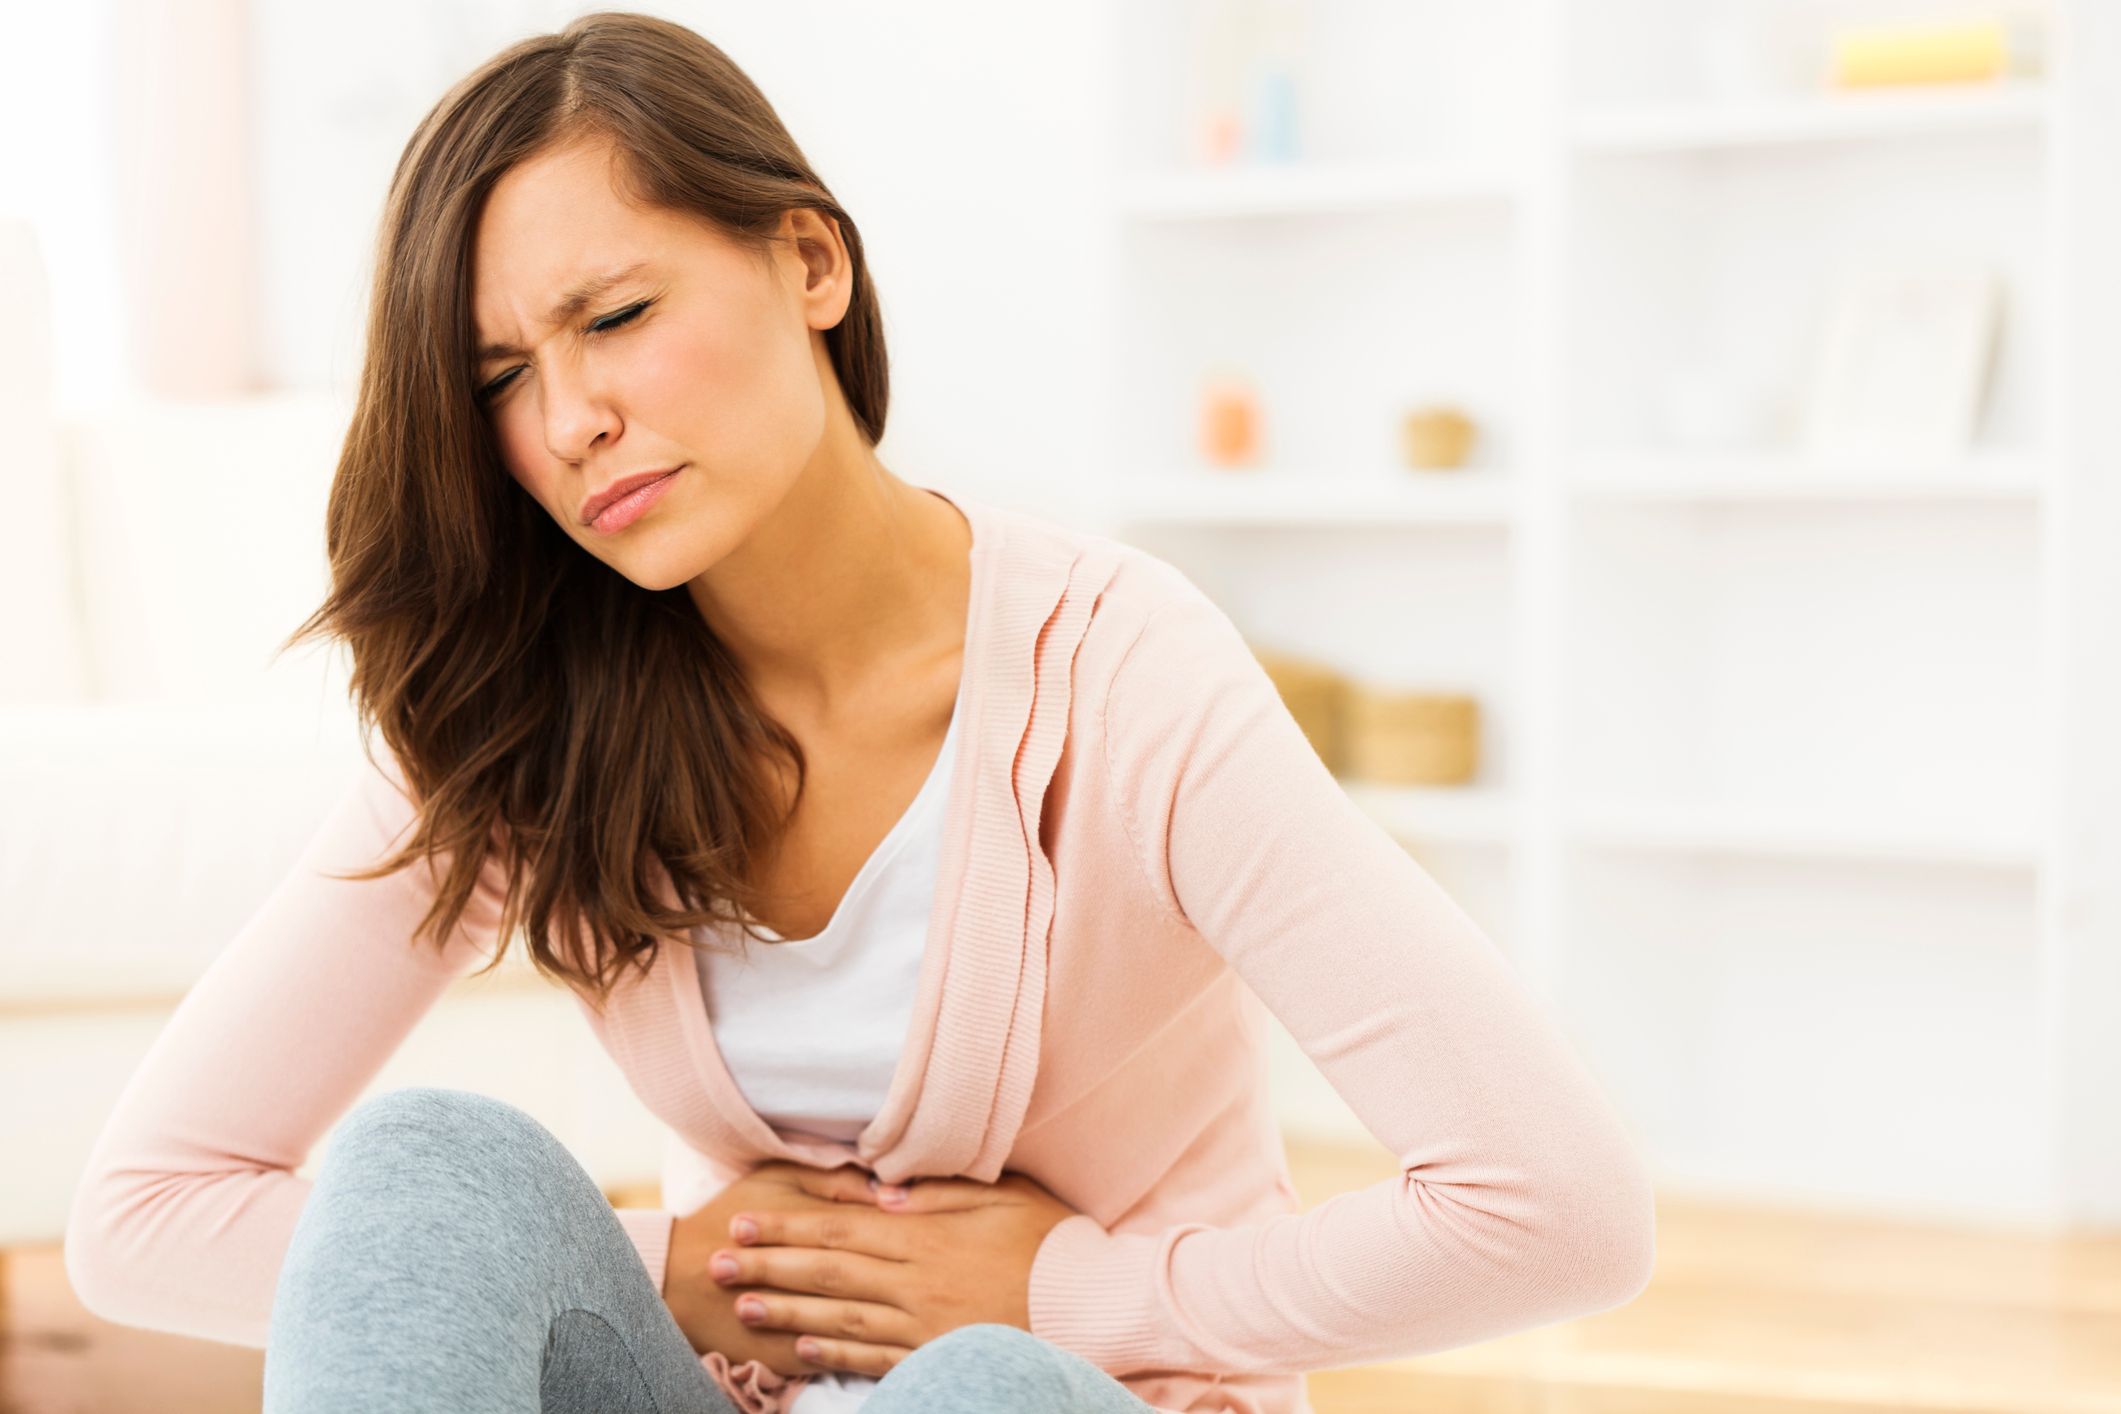 Do You Suffer From Irritable Bowel Syndrome?